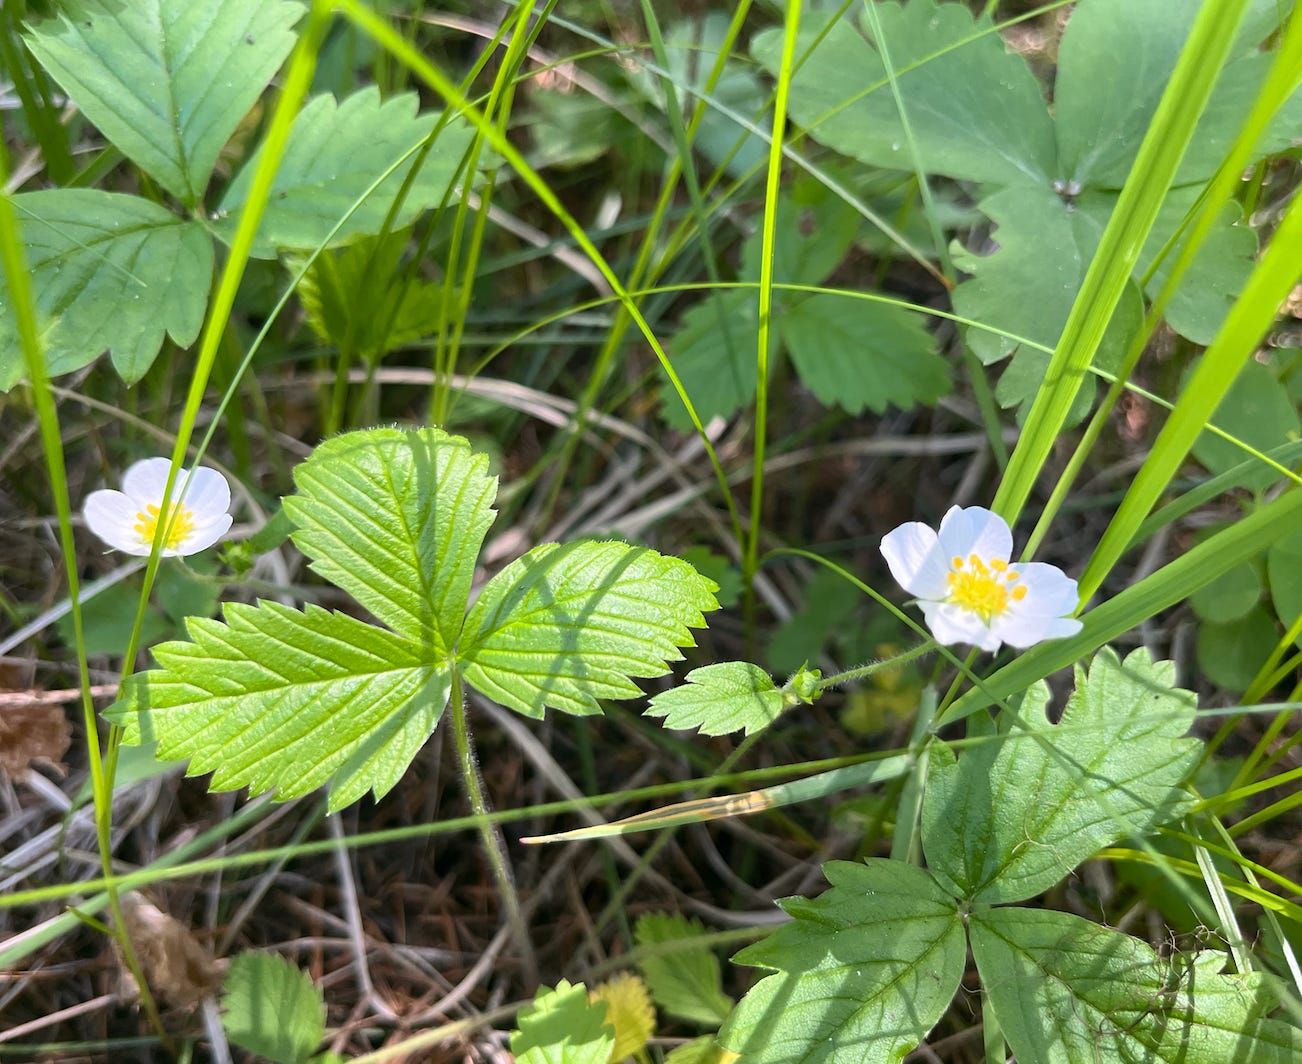 Strawberry plant on the forest floor.